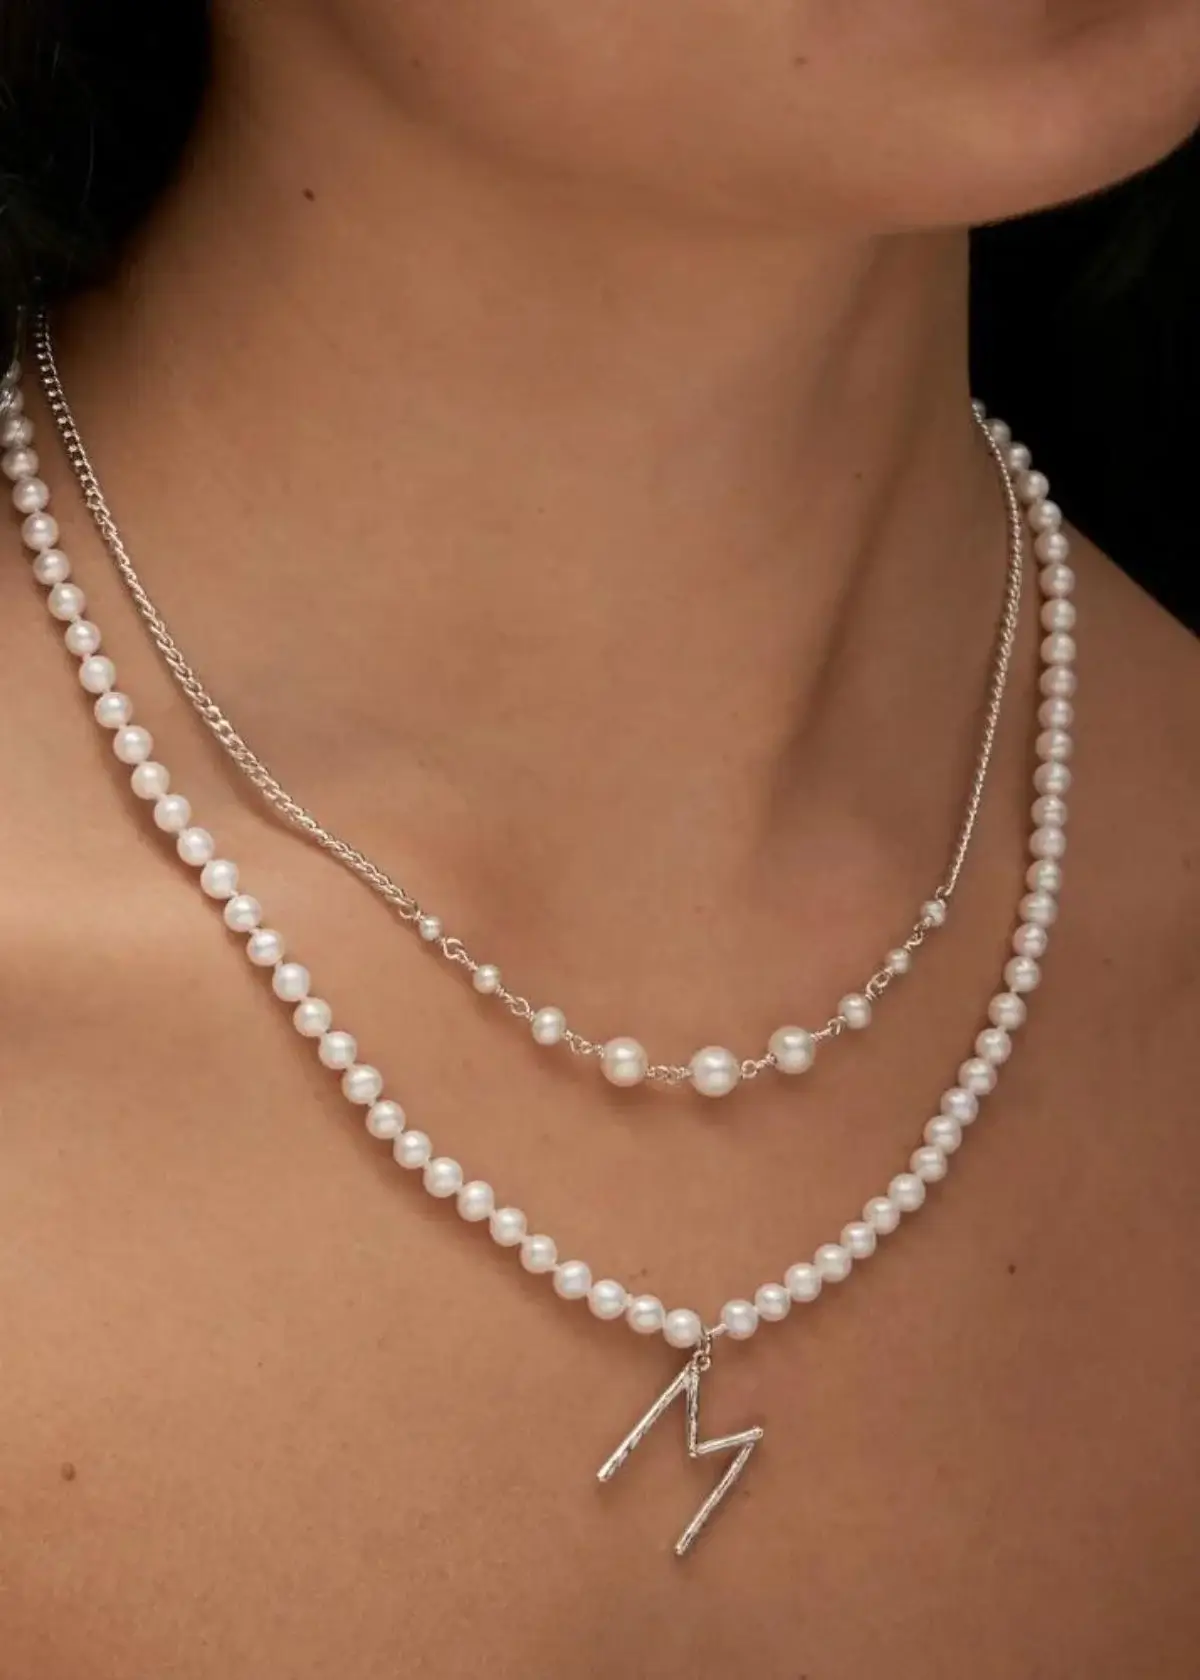 Can I pair my pearl initial necklace with other pearl jewellery?